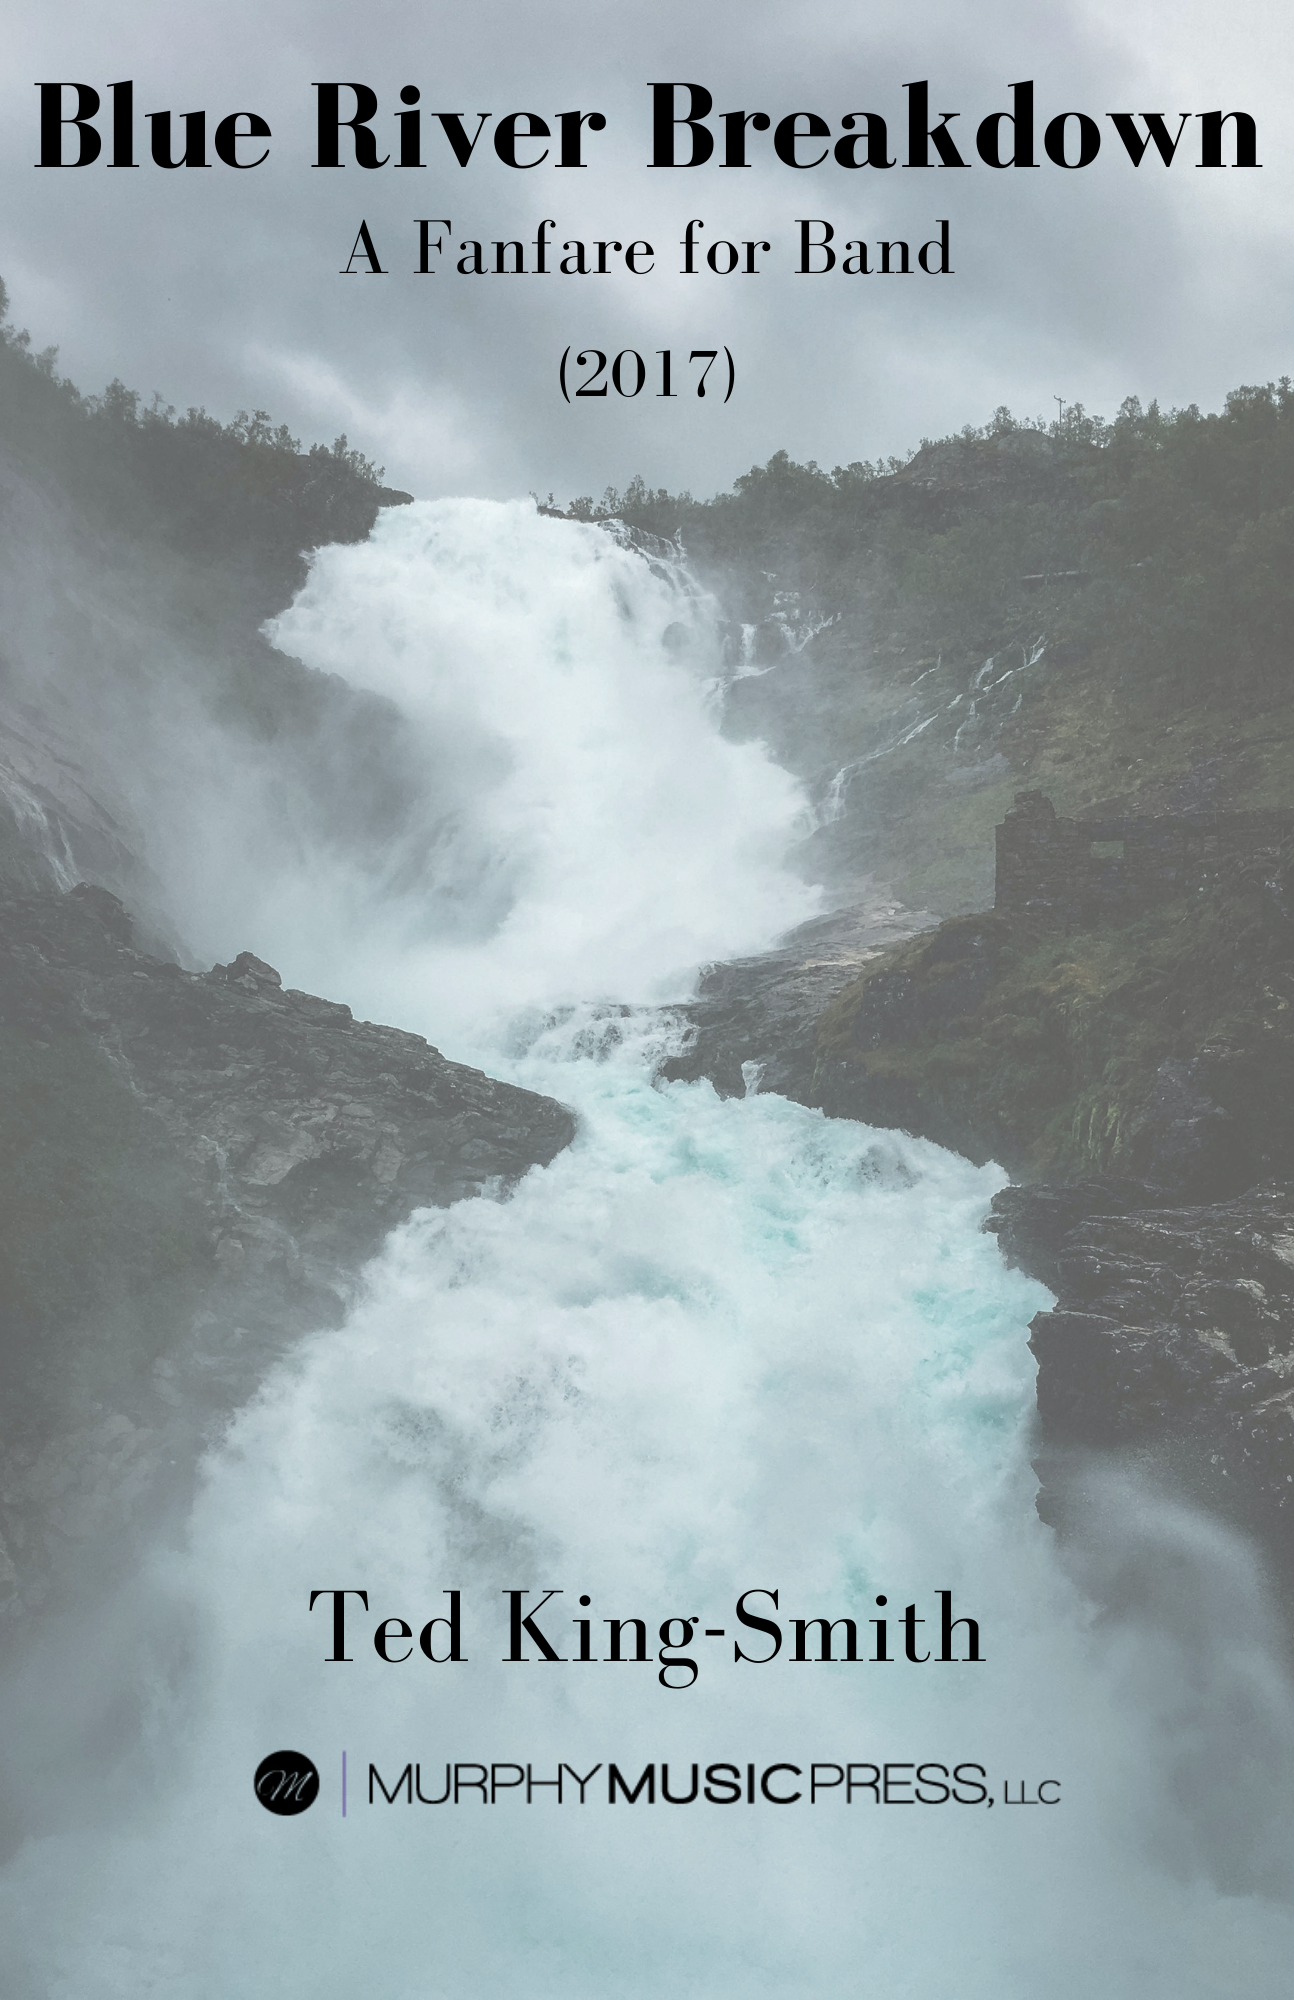 Blue River Breakdown (Score Only) by Ted King-Smith